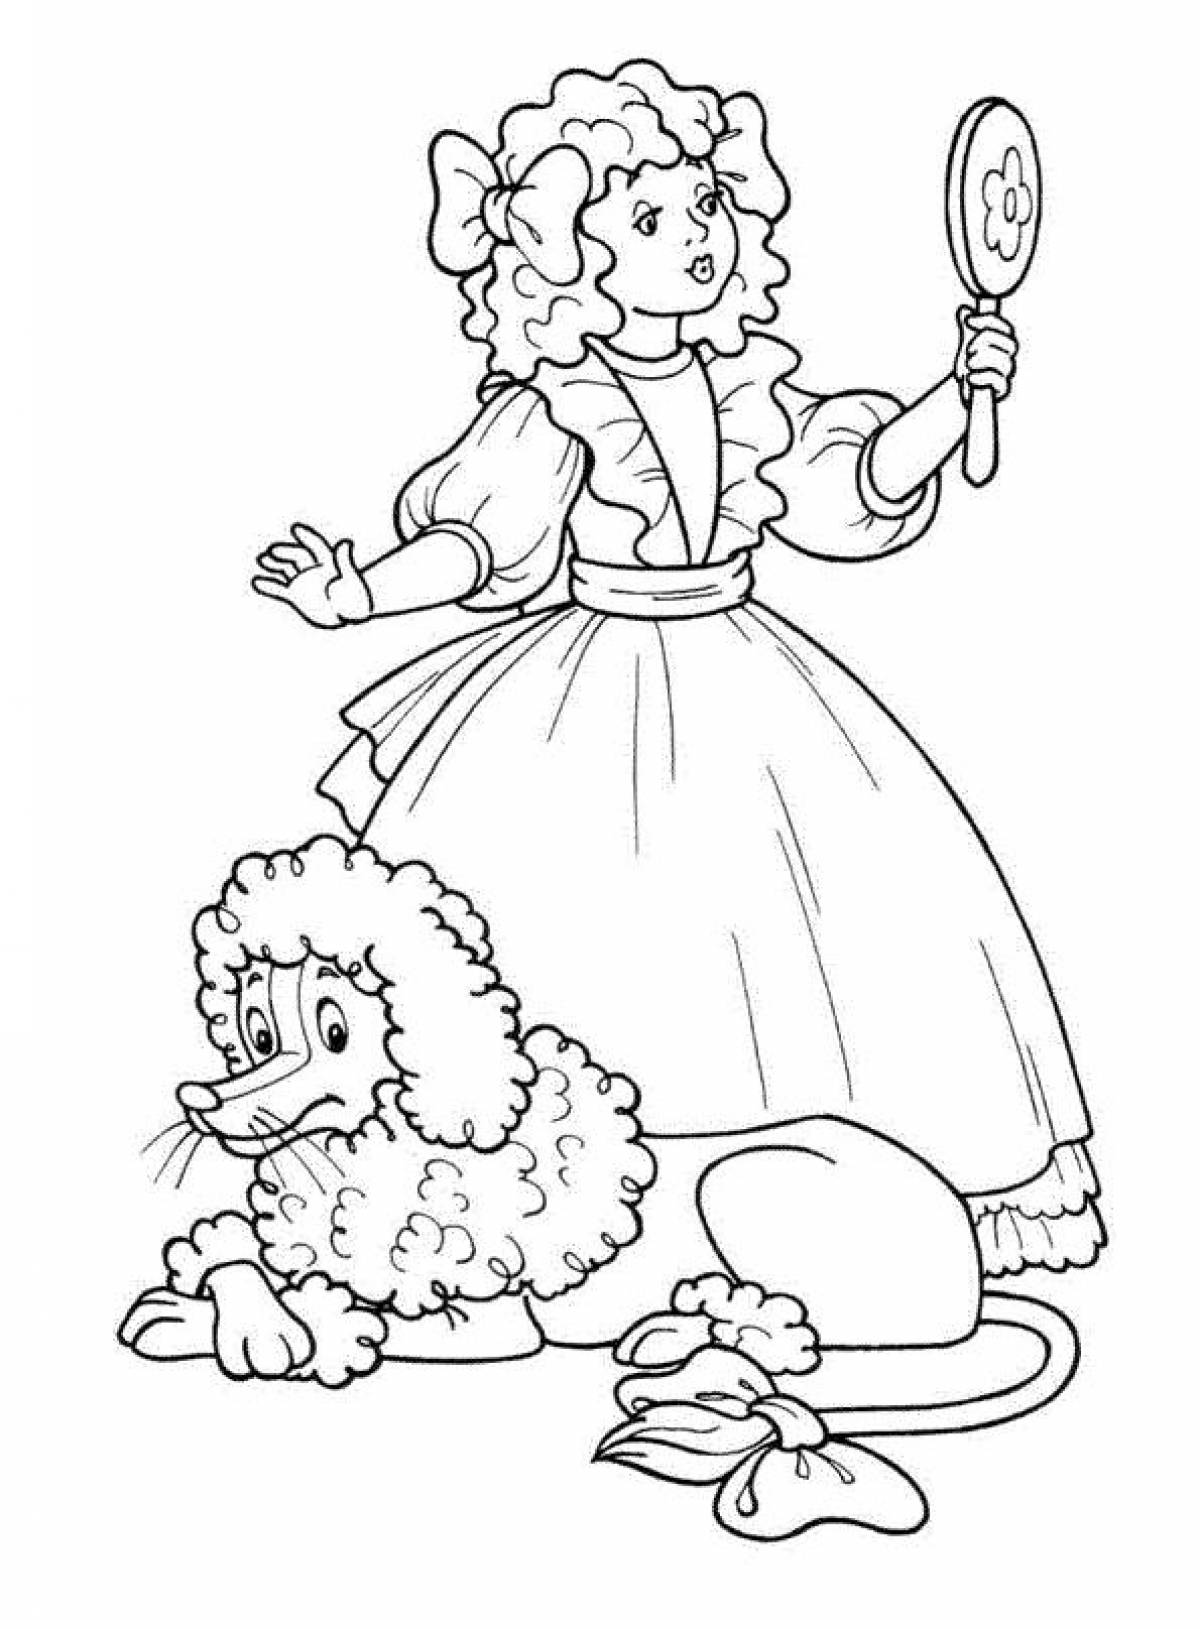 Malvina and poodle artemon